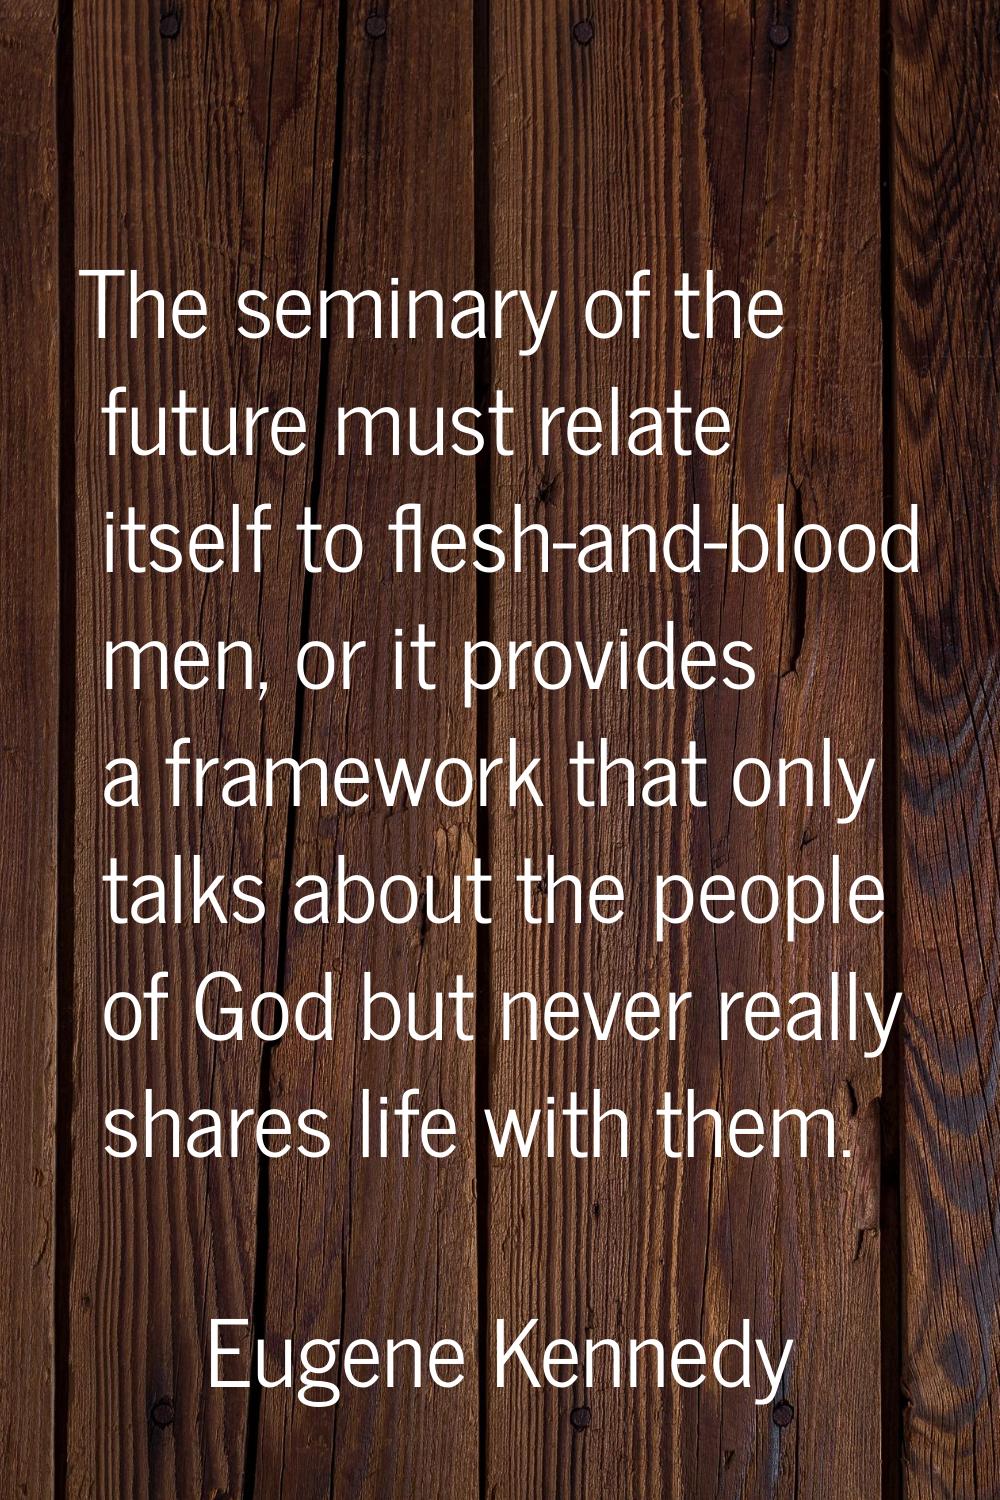 The seminary of the future must relate itself to flesh-and-blood men, or it provides a framework th